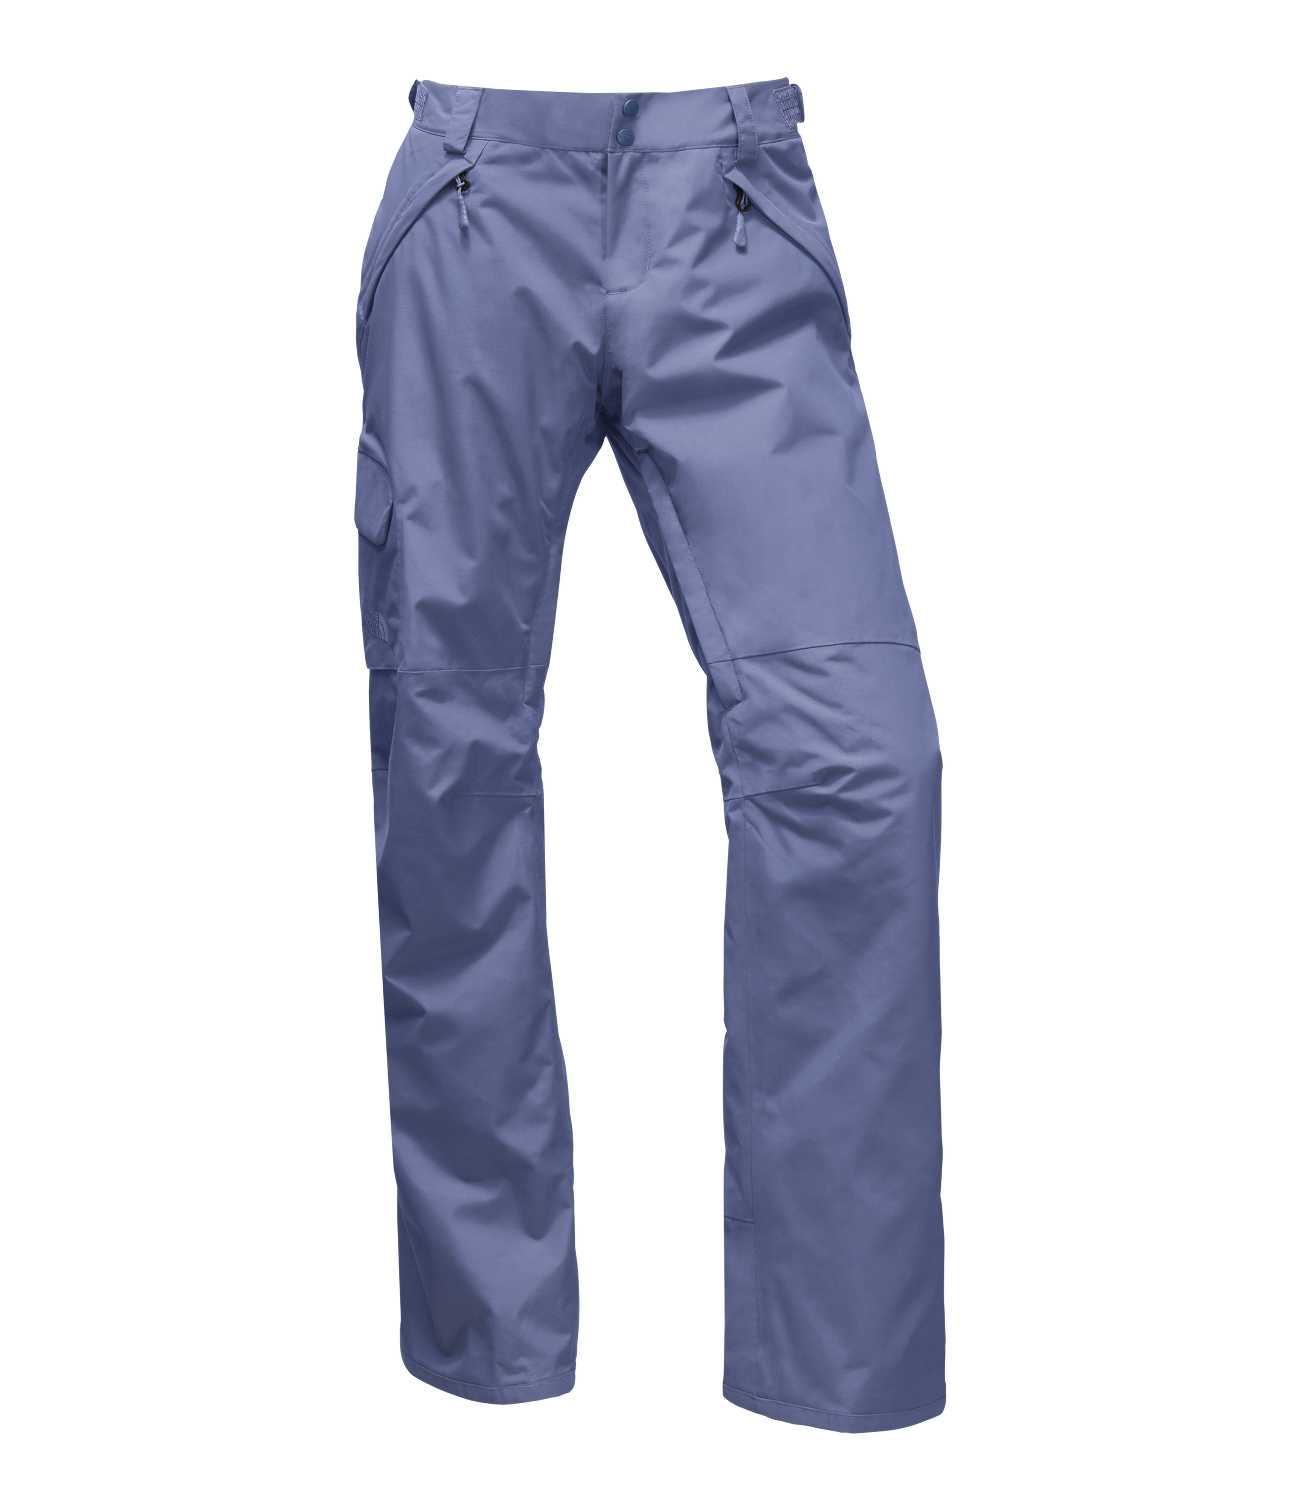 WOMEN'S FREEDOM LRBC INSULATED PANTS, The North Face